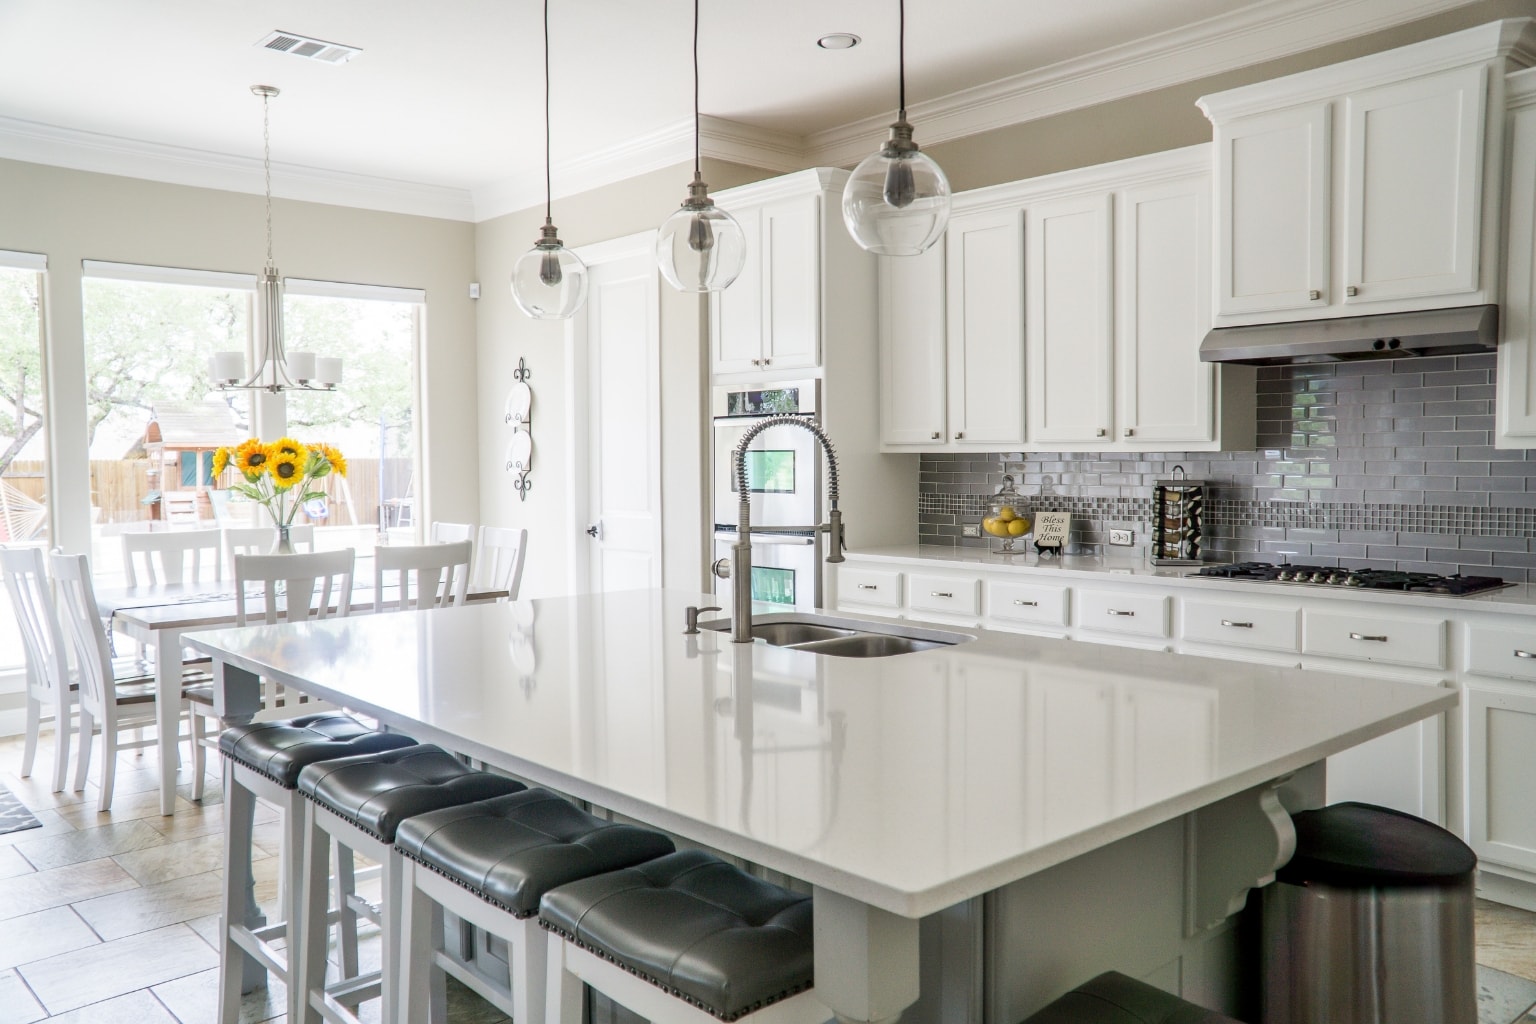 How Much Does A Complete Kitchen Remodel Cost On The Mainline